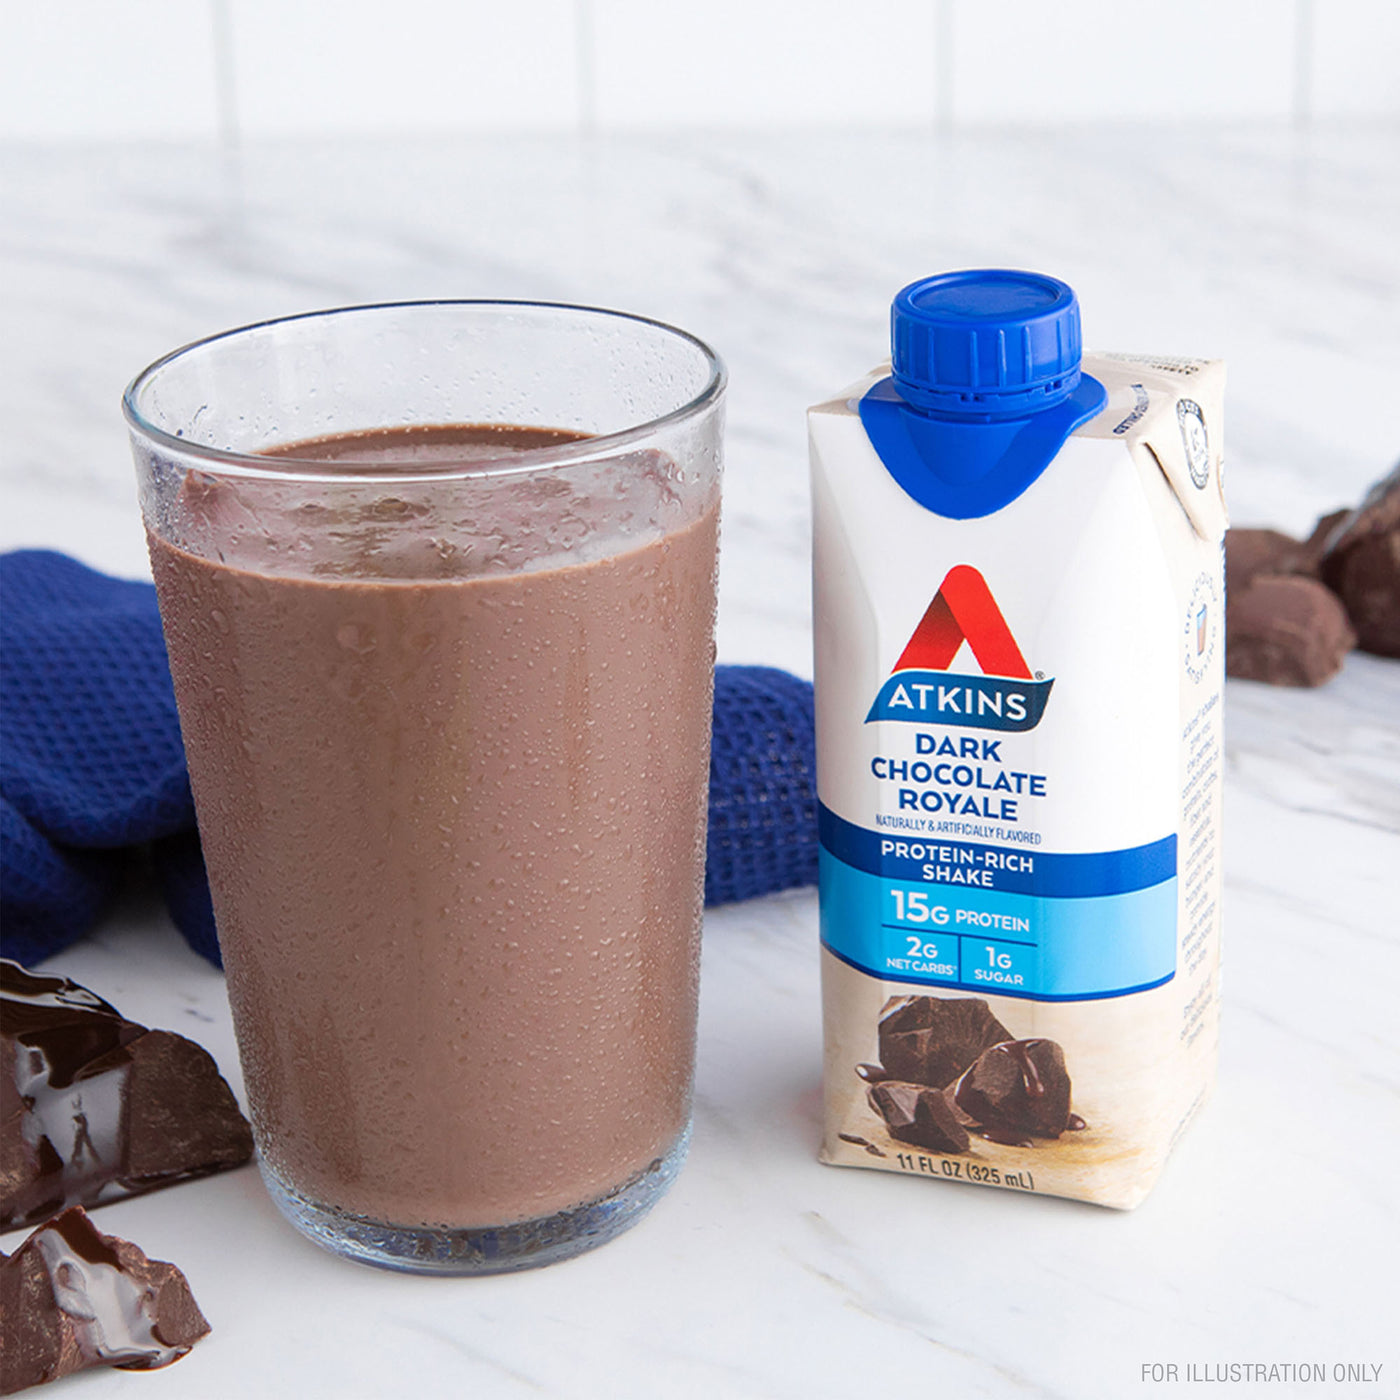 Dark Chocolate Royale Shake with a glass filled with shake next to chocolate bites and blue cloth on marble table